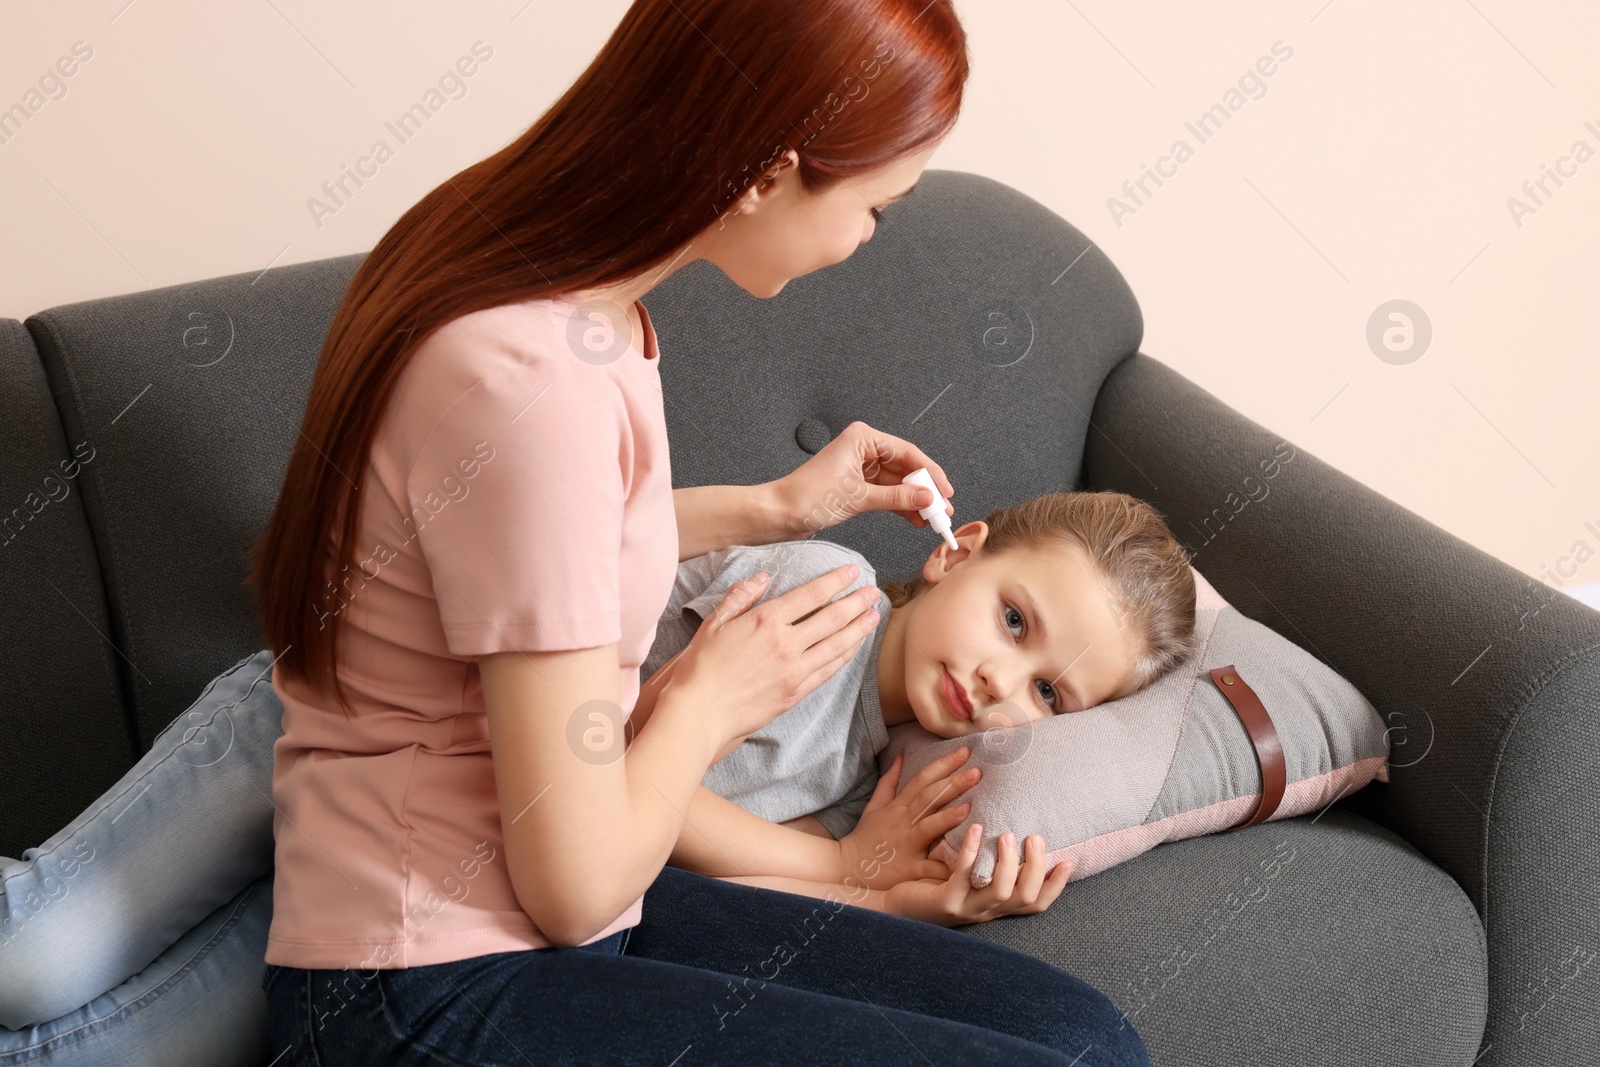 Photo of Mother dripping medication into daughter's ear in living room